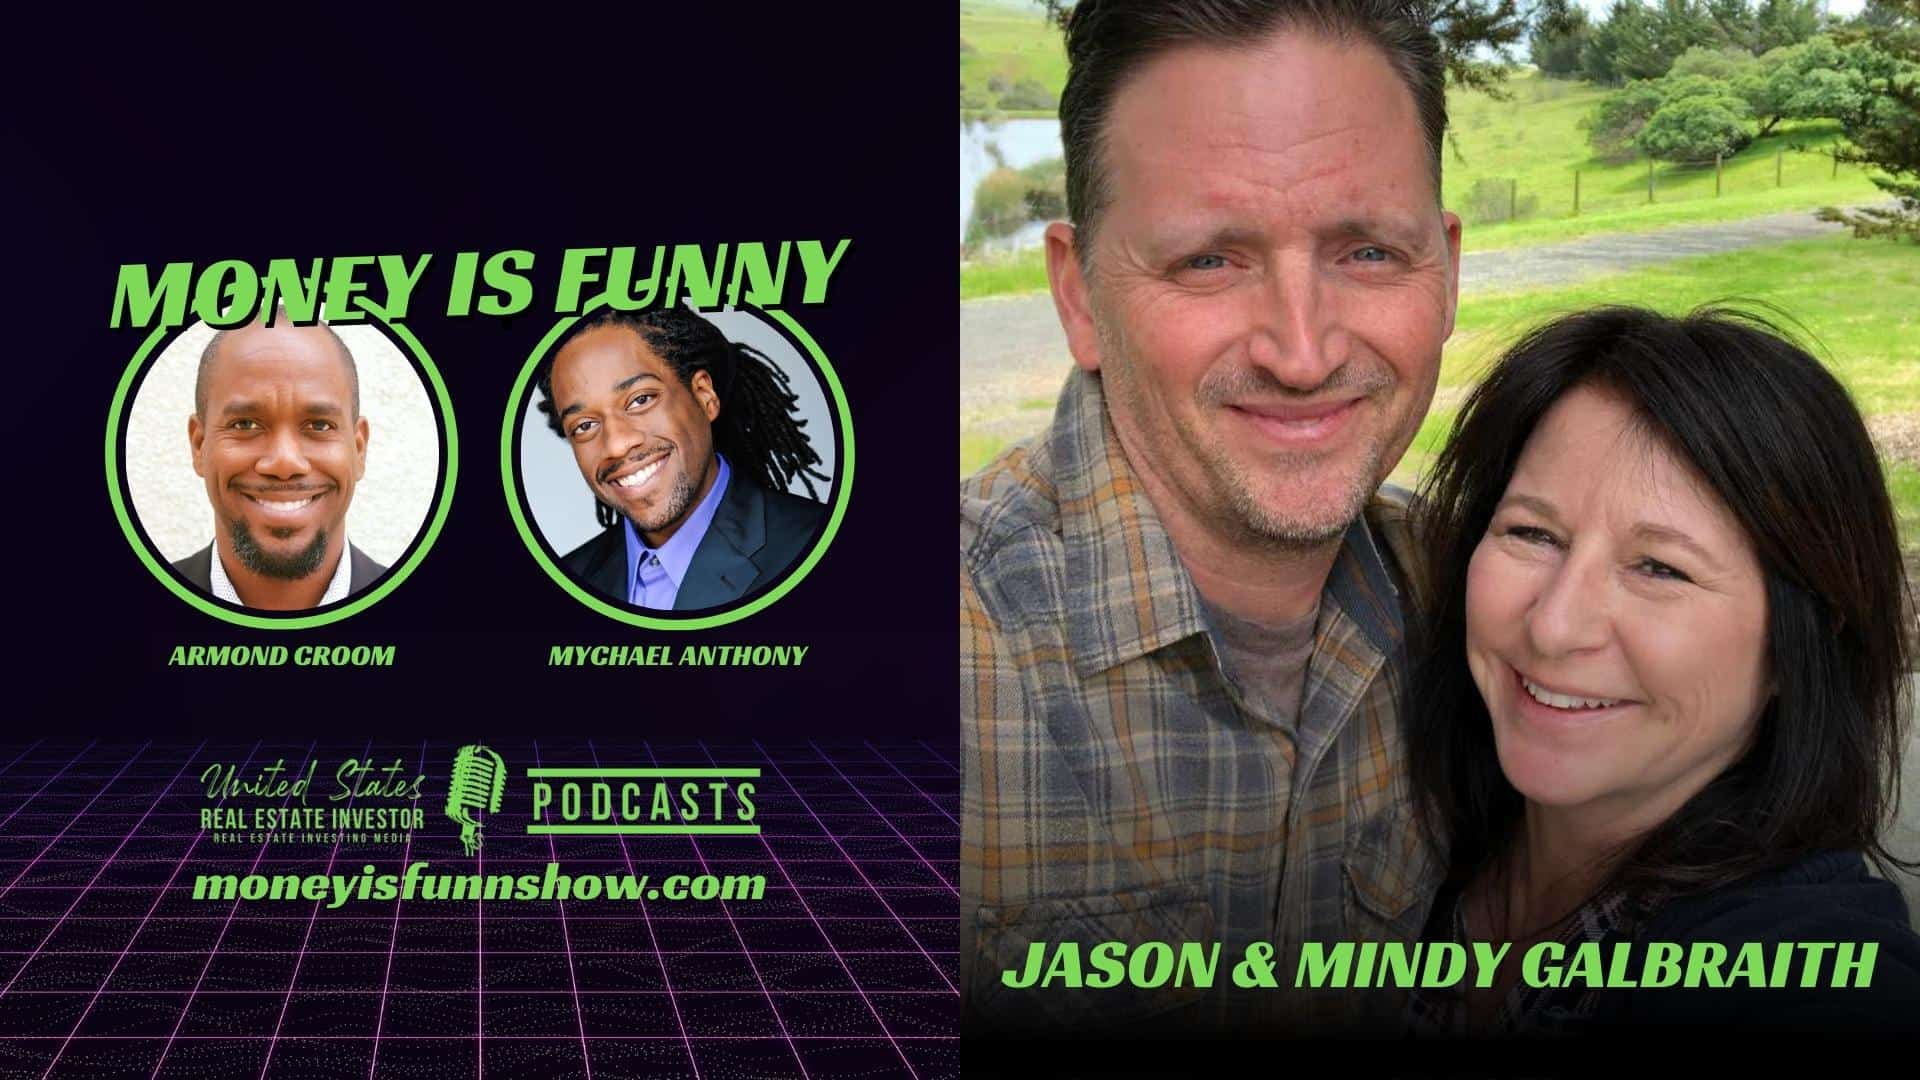 Marriage Finances, Building Wealth Together with Jason and Mindy Galbraith on the Money Is Funny podcast co-hosted by financial advisor Armond Croom and actor/comedian Mychael Anthony.